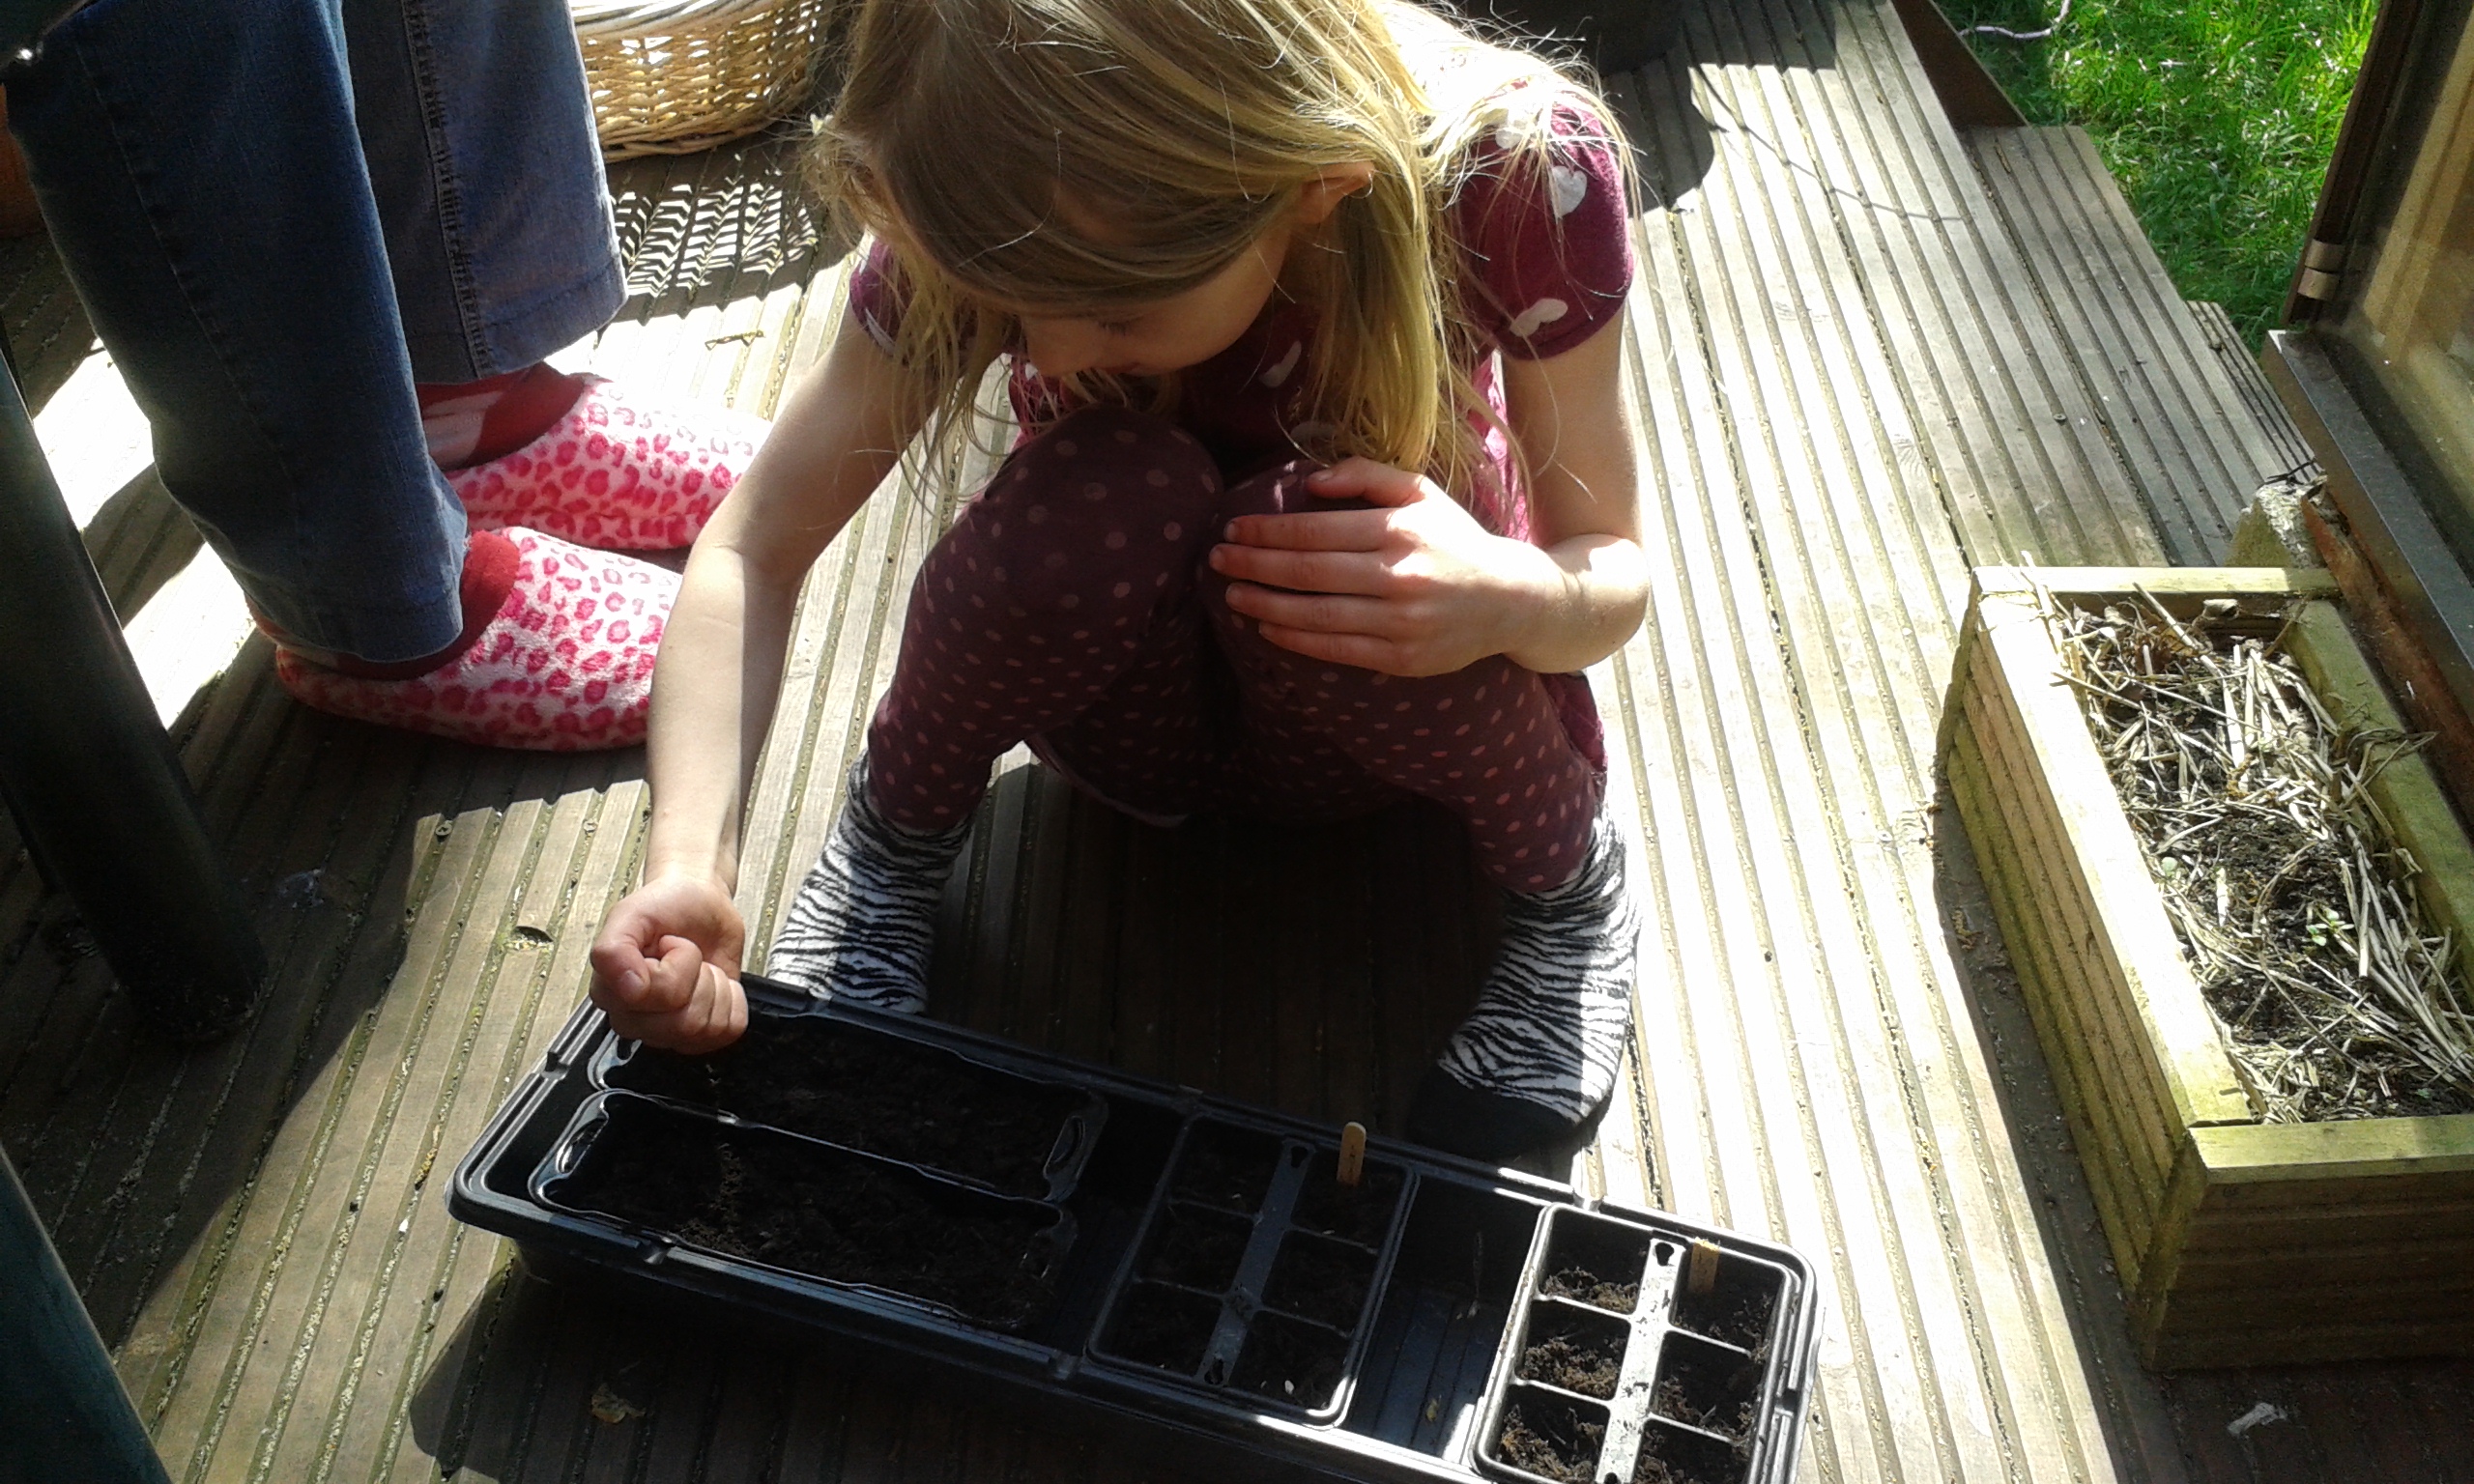 sowing seeds